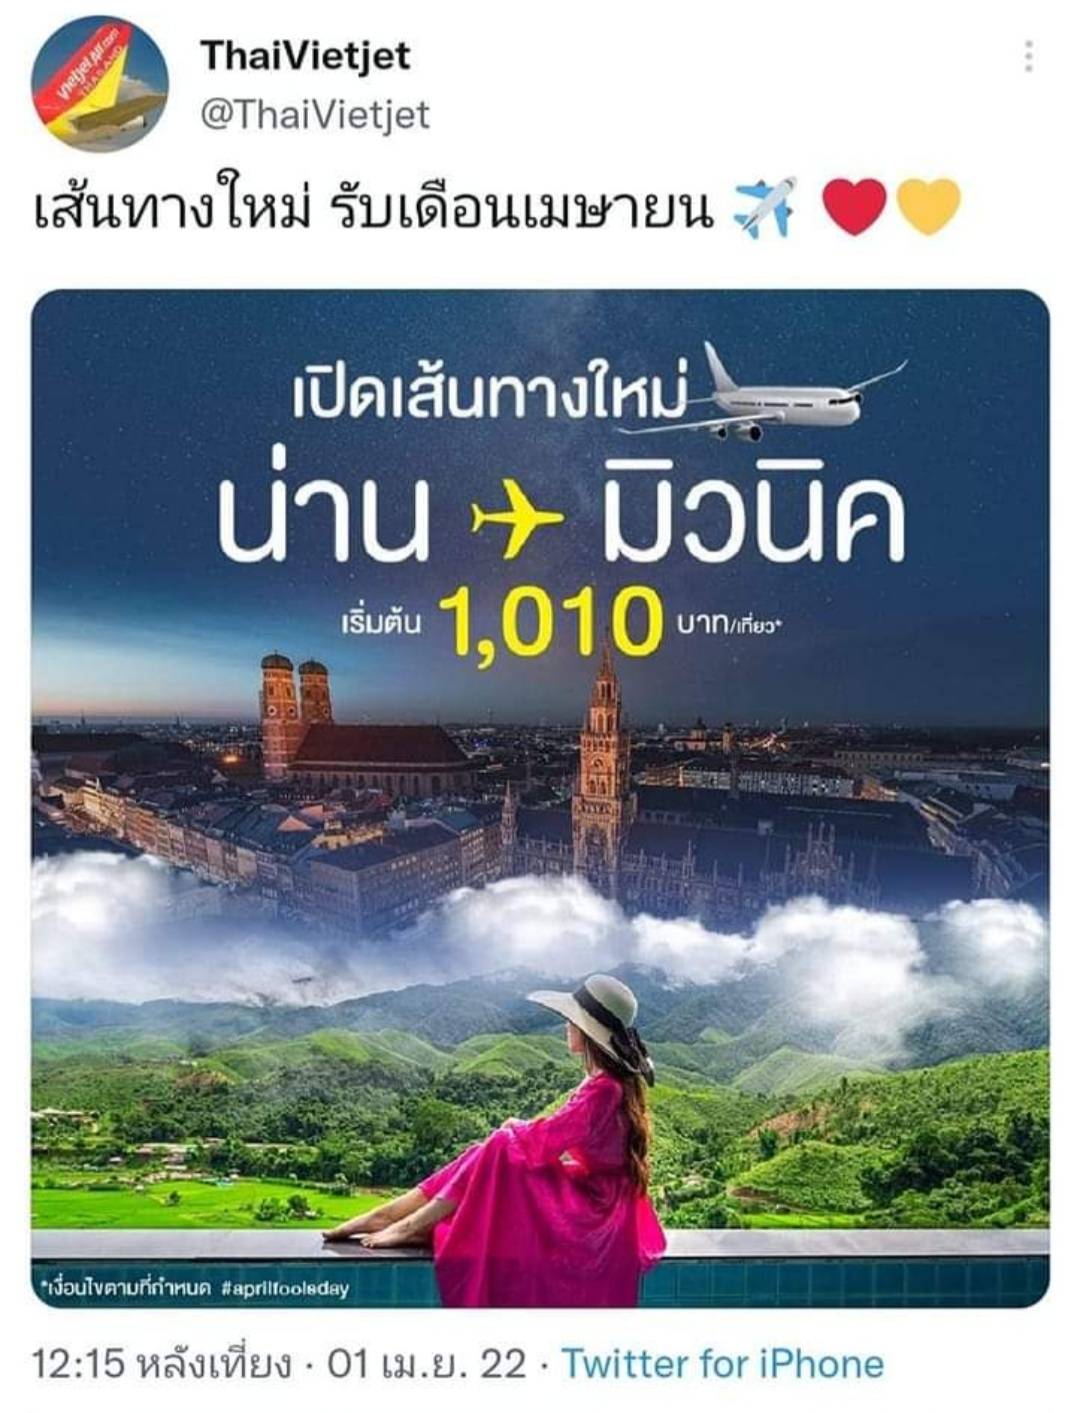 A screenshot of the now-deleted tweet by Thai VietJet.